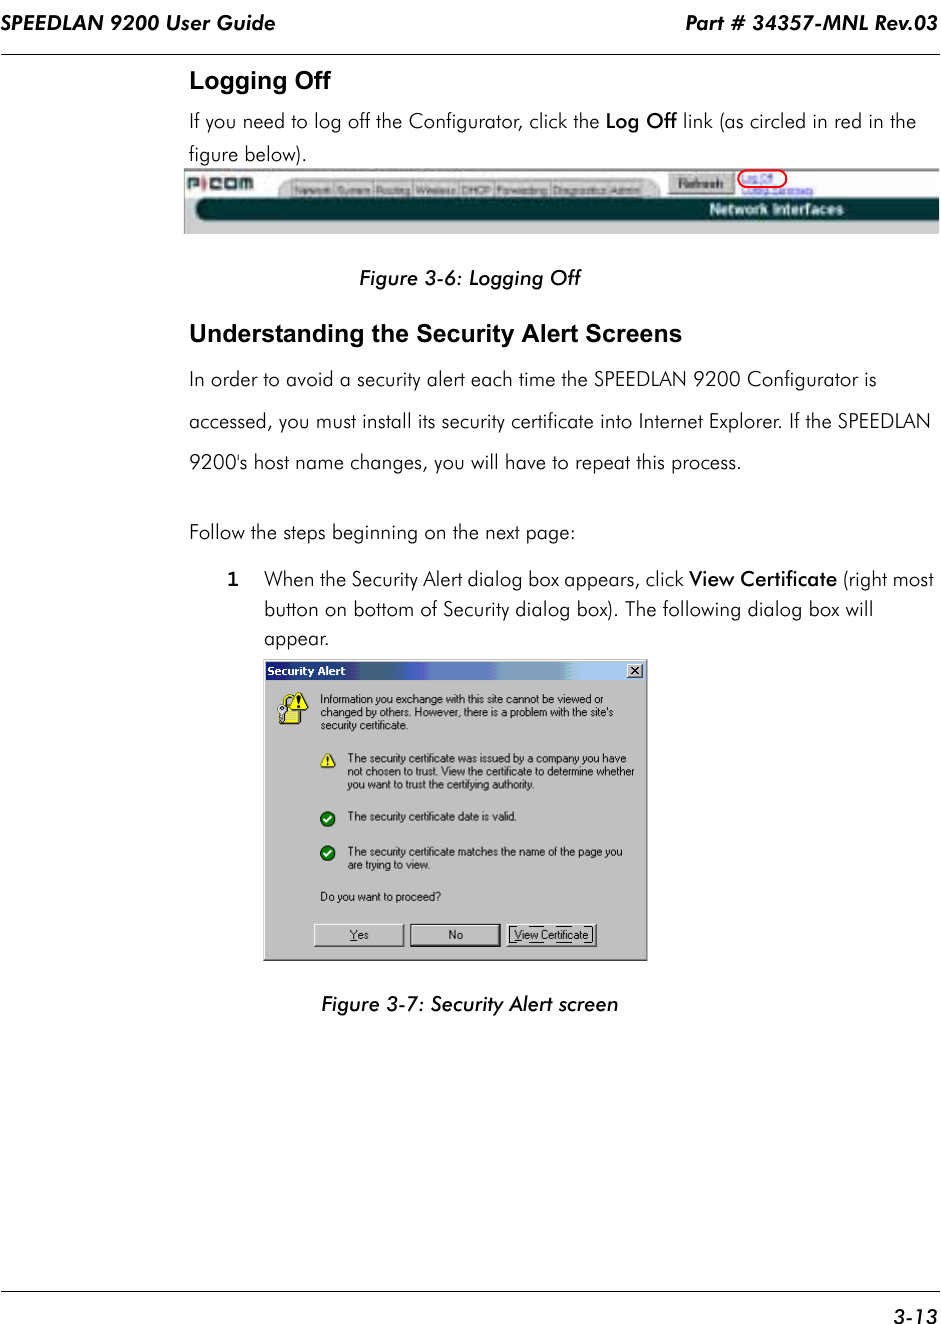 SPEEDLAN 9200 User Guide                                                                    Part # 34357-MNL Rev.03      3-13                                                                                                                                                              Logging OffIf you need to log off the Configurator, click the Log Off link (as circled in red in the figure below).Figure 3-6: Logging OffUnderstanding the Security Alert ScreensIn order to avoid a security alert each time the SPEEDLAN 9200 Configurator is accessed, you must install its security certificate into Internet Explorer. If the SPEEDLAN 9200&apos;s host name changes, you will have to repeat this process. Follow the steps beginning on the next page:1When the Security Alert dialog box appears, click View Certificate (right most button on bottom of Security dialog box). The following dialog box will appear.Figure 3-7: Security Alert screen